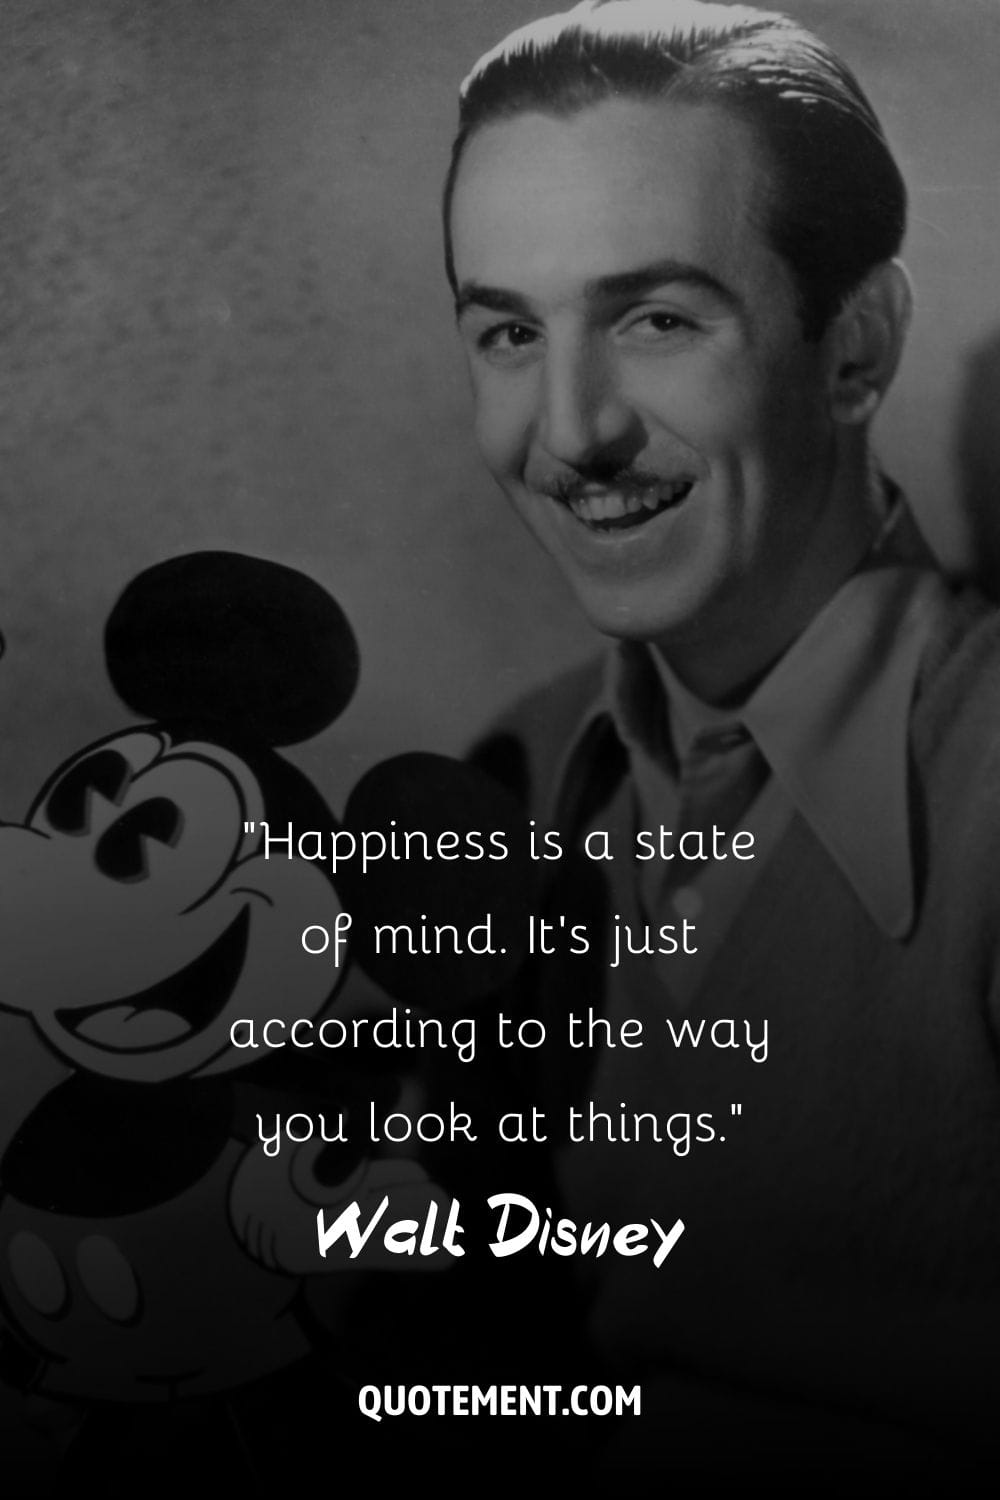 Walt Disney and Mickey Mouse representing the best quote by Walt Disney.